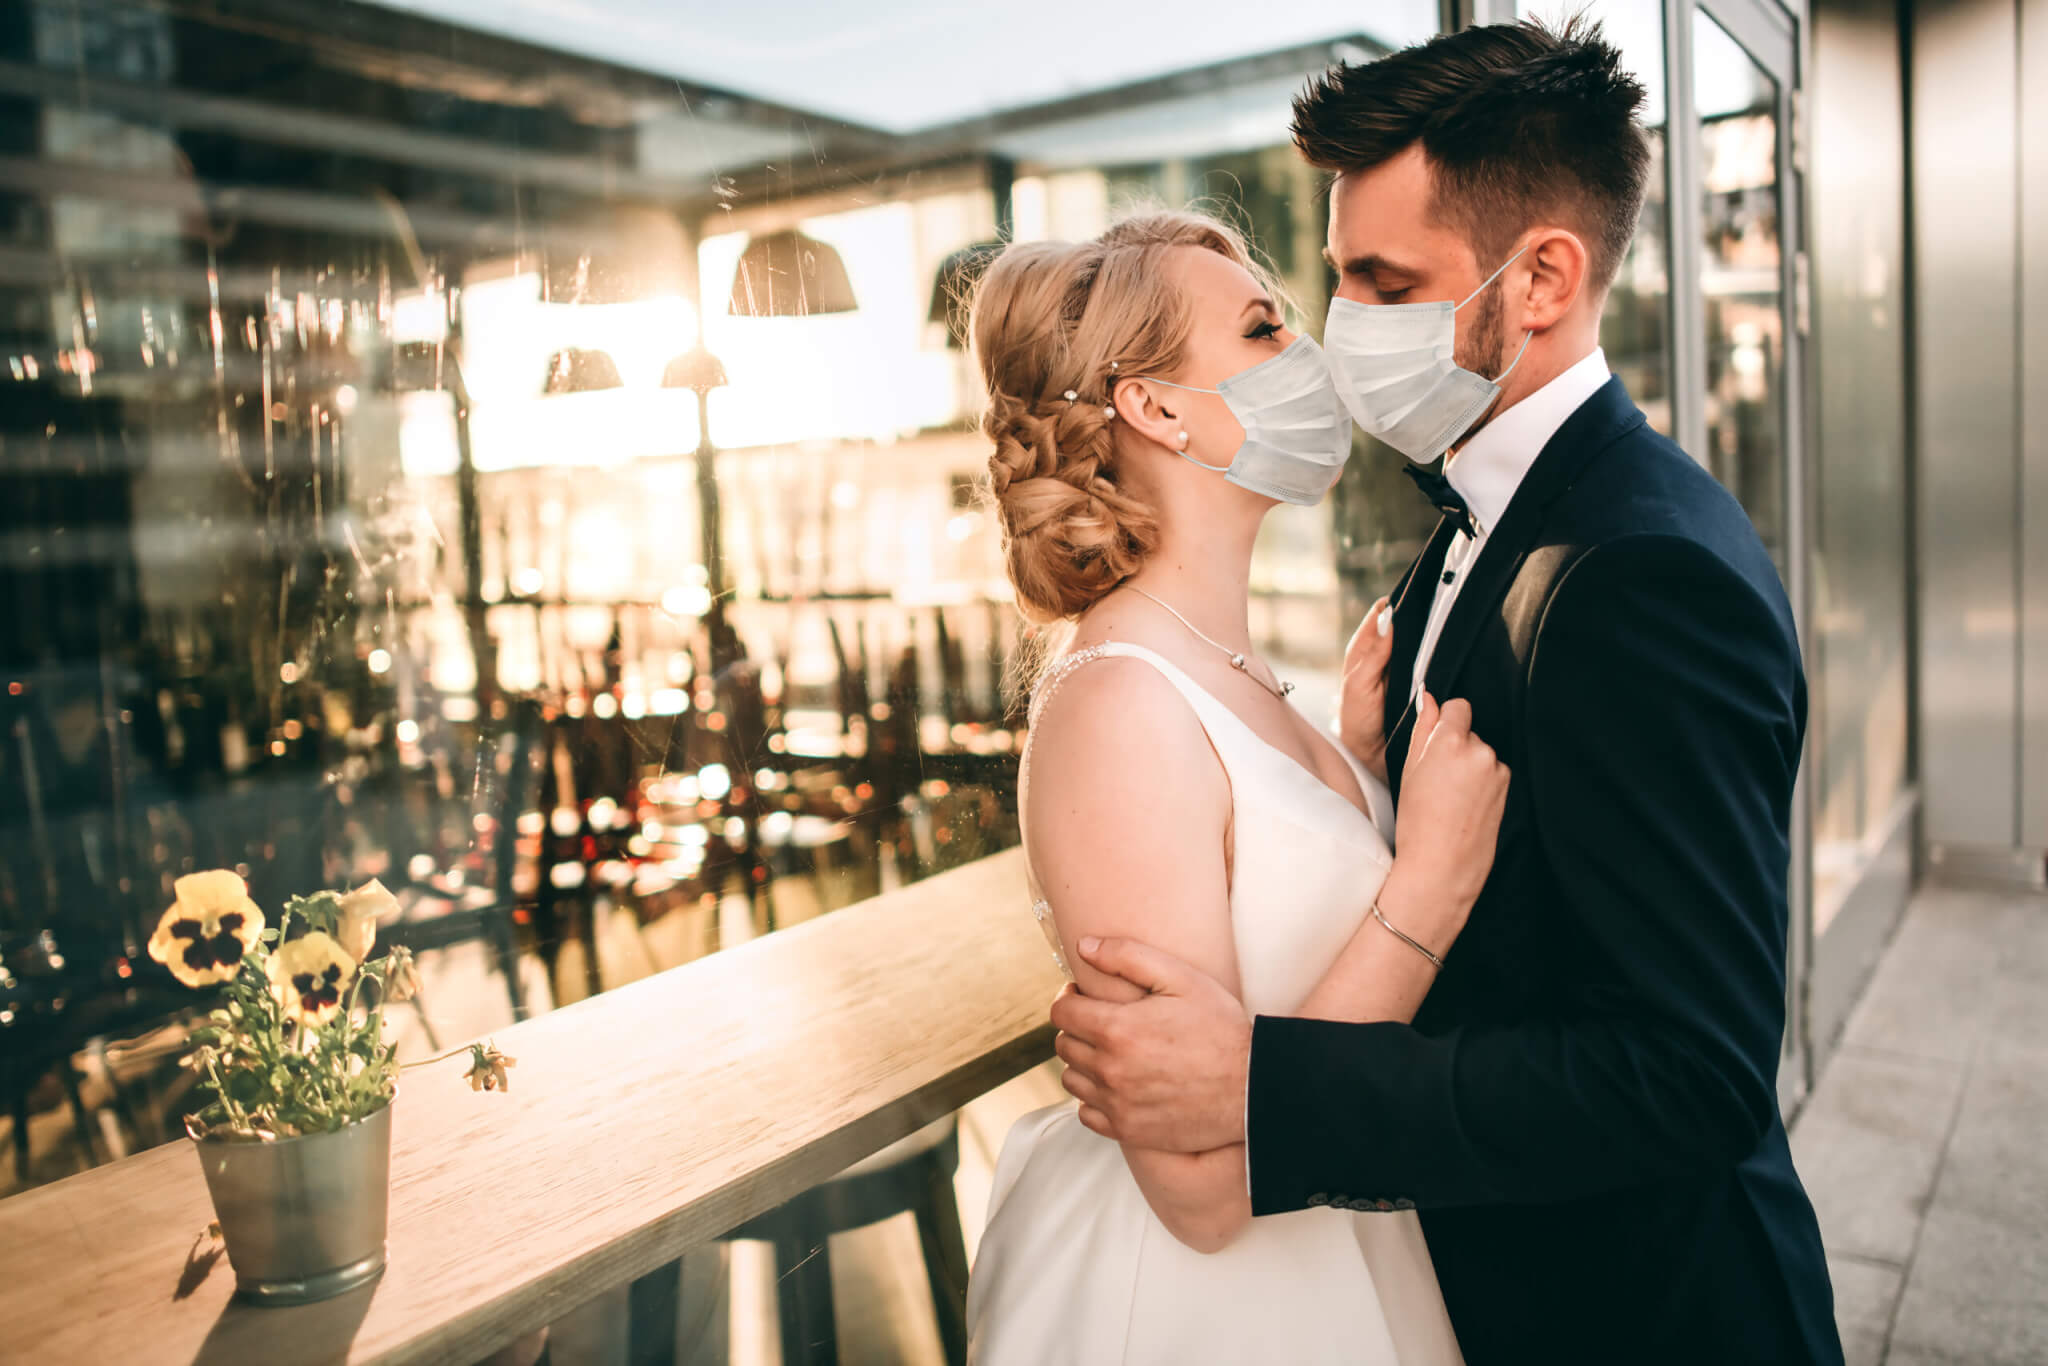 New York’s Latest Mask Mandate Ends. What This Means for Long Island Weddings.